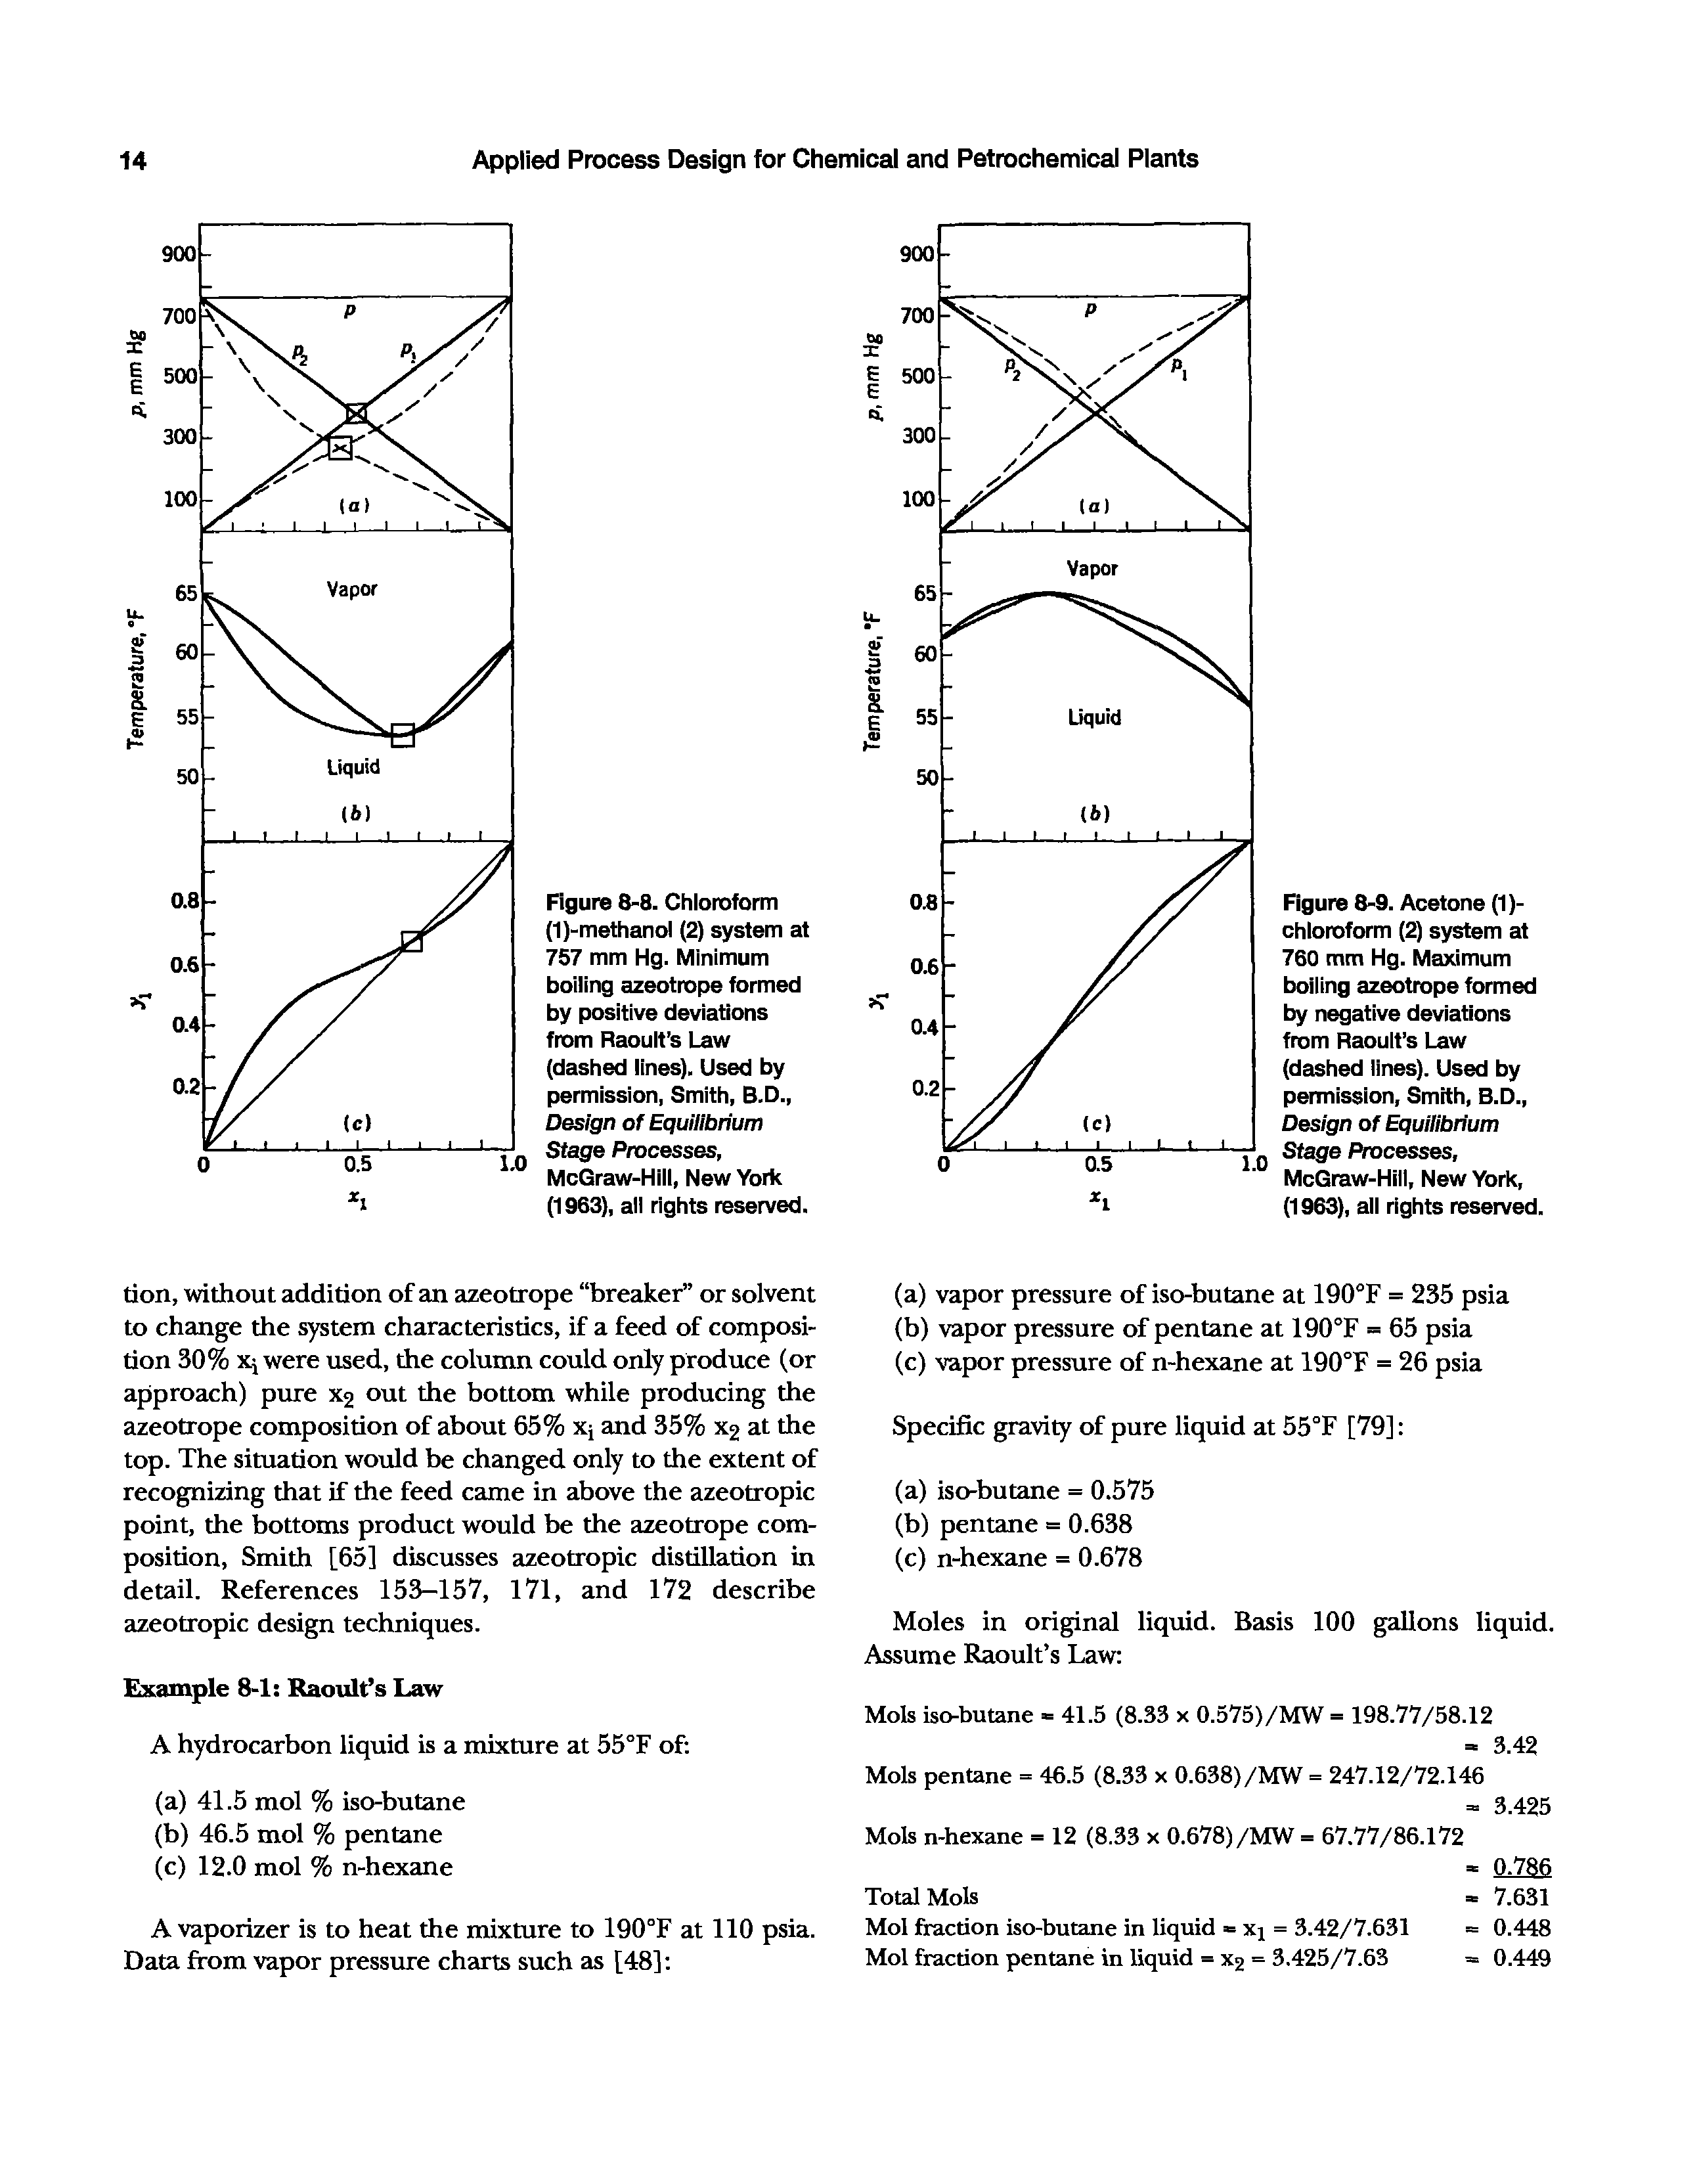 Figure 8-9. Acetone (1)-chloroform (2) system at 760 mm Hg. Maximum boiling azeotrope formed by negative deviations from Raoult s Law (dashed lines). Used by permission, Smith, B.D., Design of EquiUbnum Stage Processes, McGraw-Hill, New York, (1963), all rights reserved.